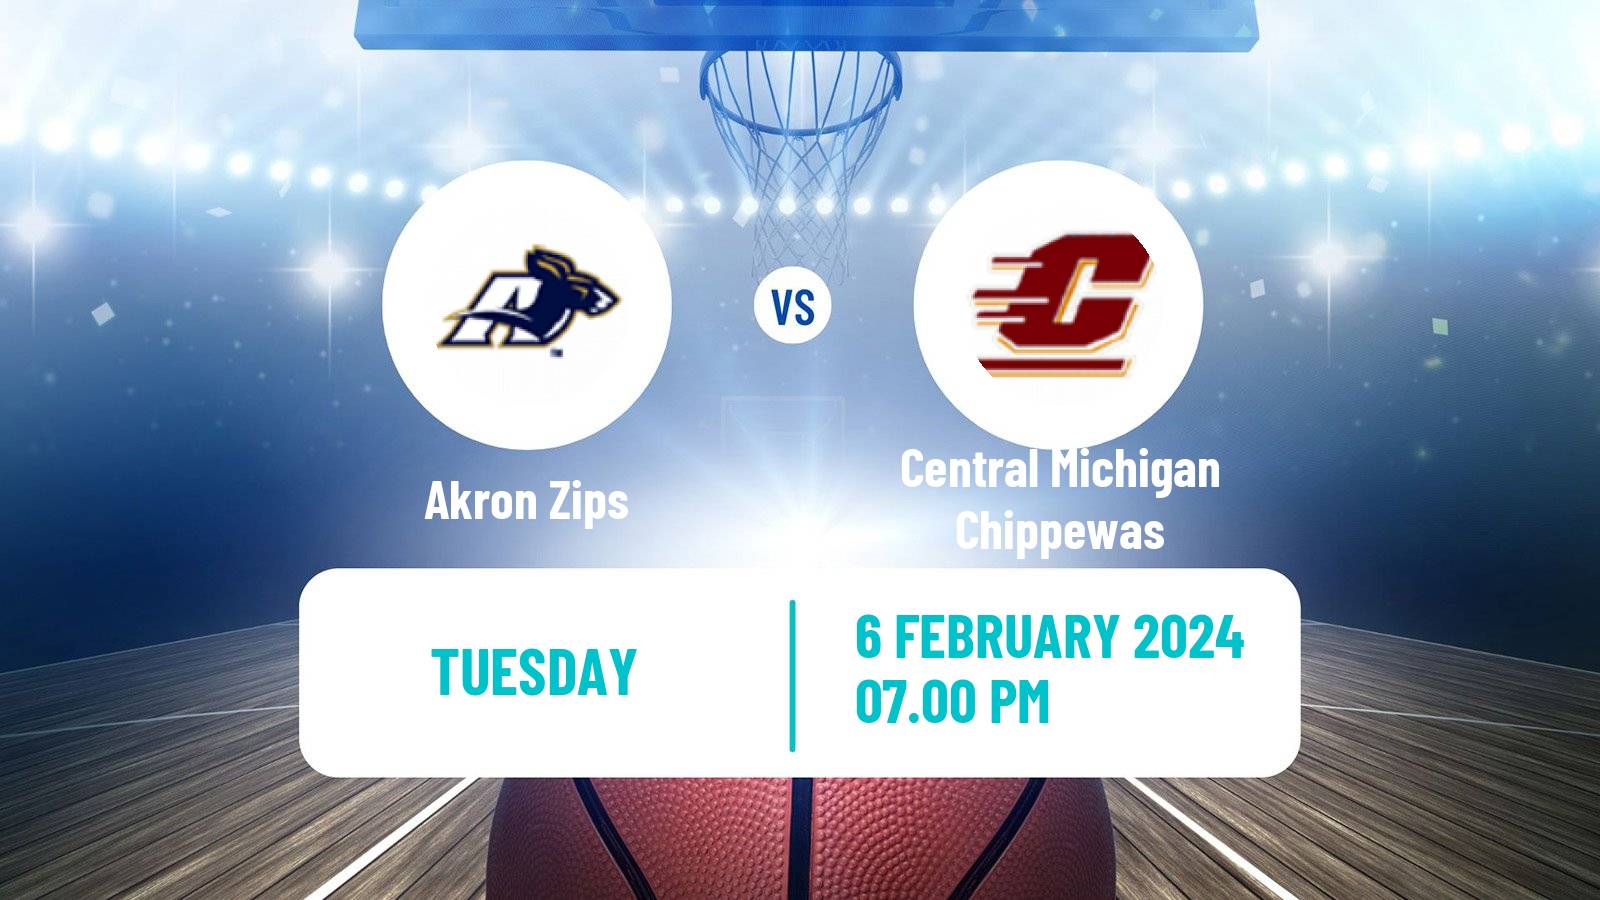 Basketball NCAA College Basketball Akron Zips - Central Michigan Chippewas